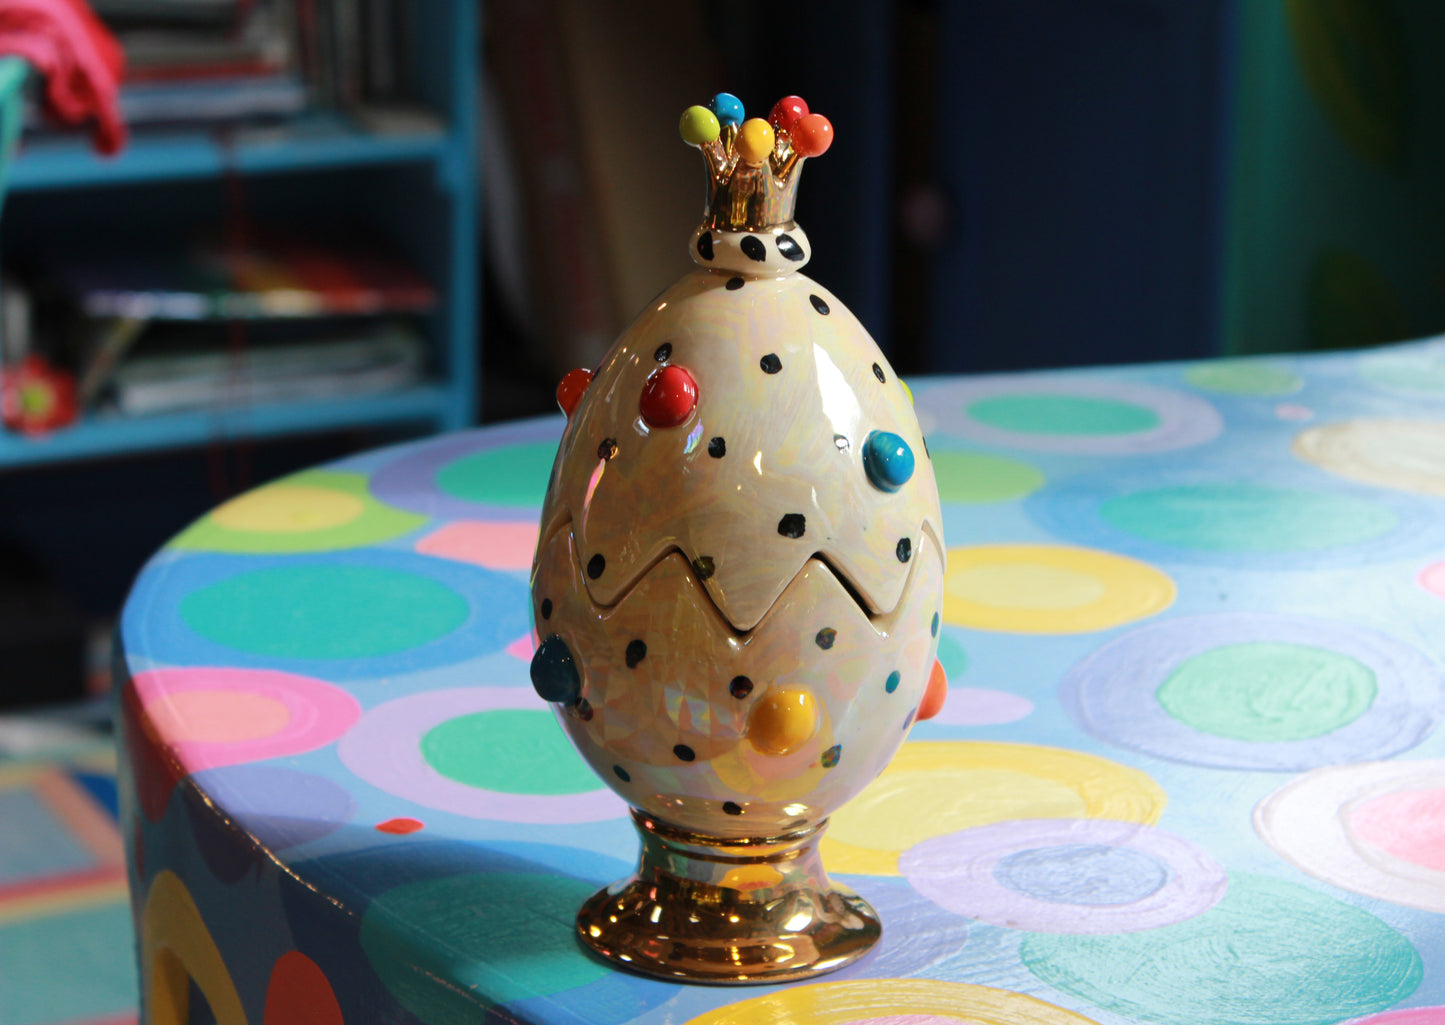 Bobble Studded Easter Egg with Crown Polka Dots